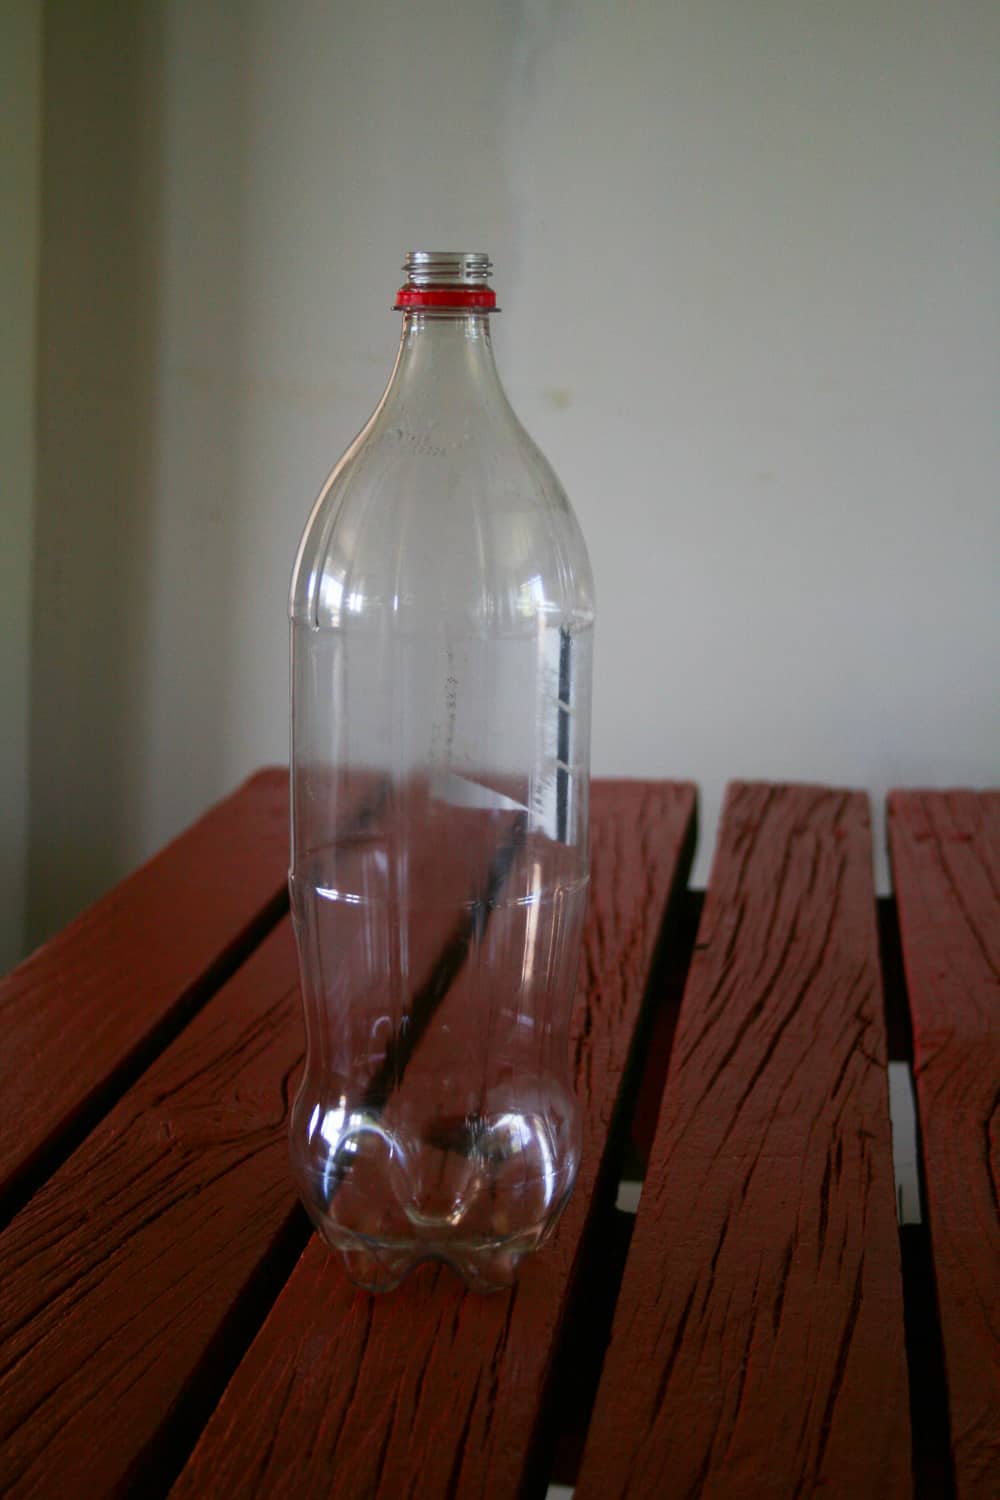 Flies driving you Crazy? Make this simple Homemade Fly Catcher in the next 5 minutes using a plastic bottle and a pair of scissors. You can have it set up and catching those pesky flies in a matter of minutes